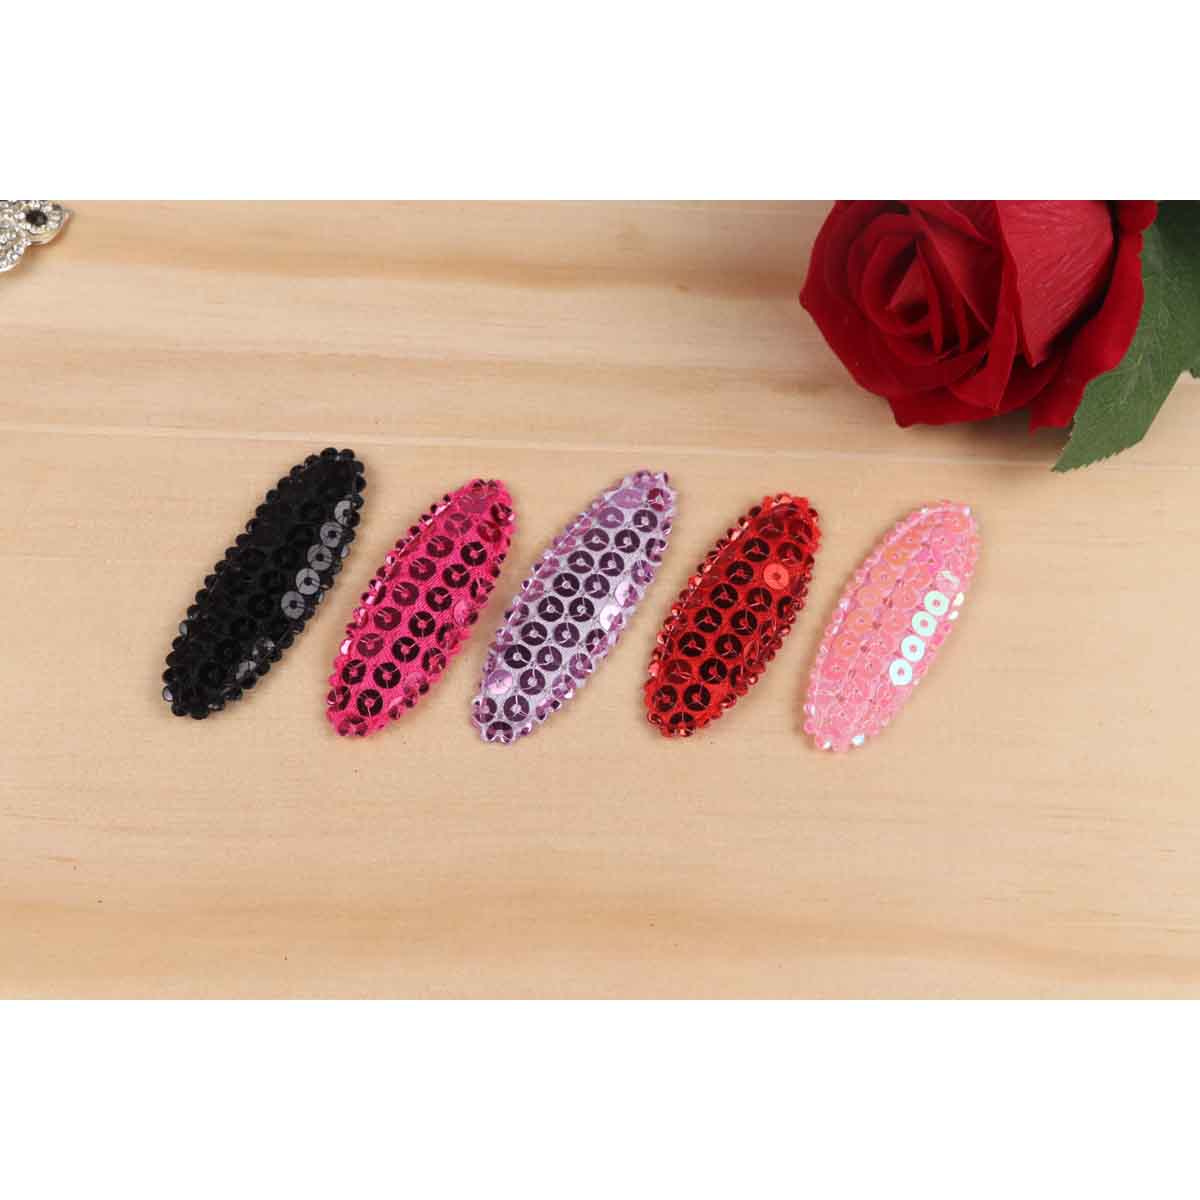 100 Padded Sequin Hair Clip Covers 55mm-5 Colors